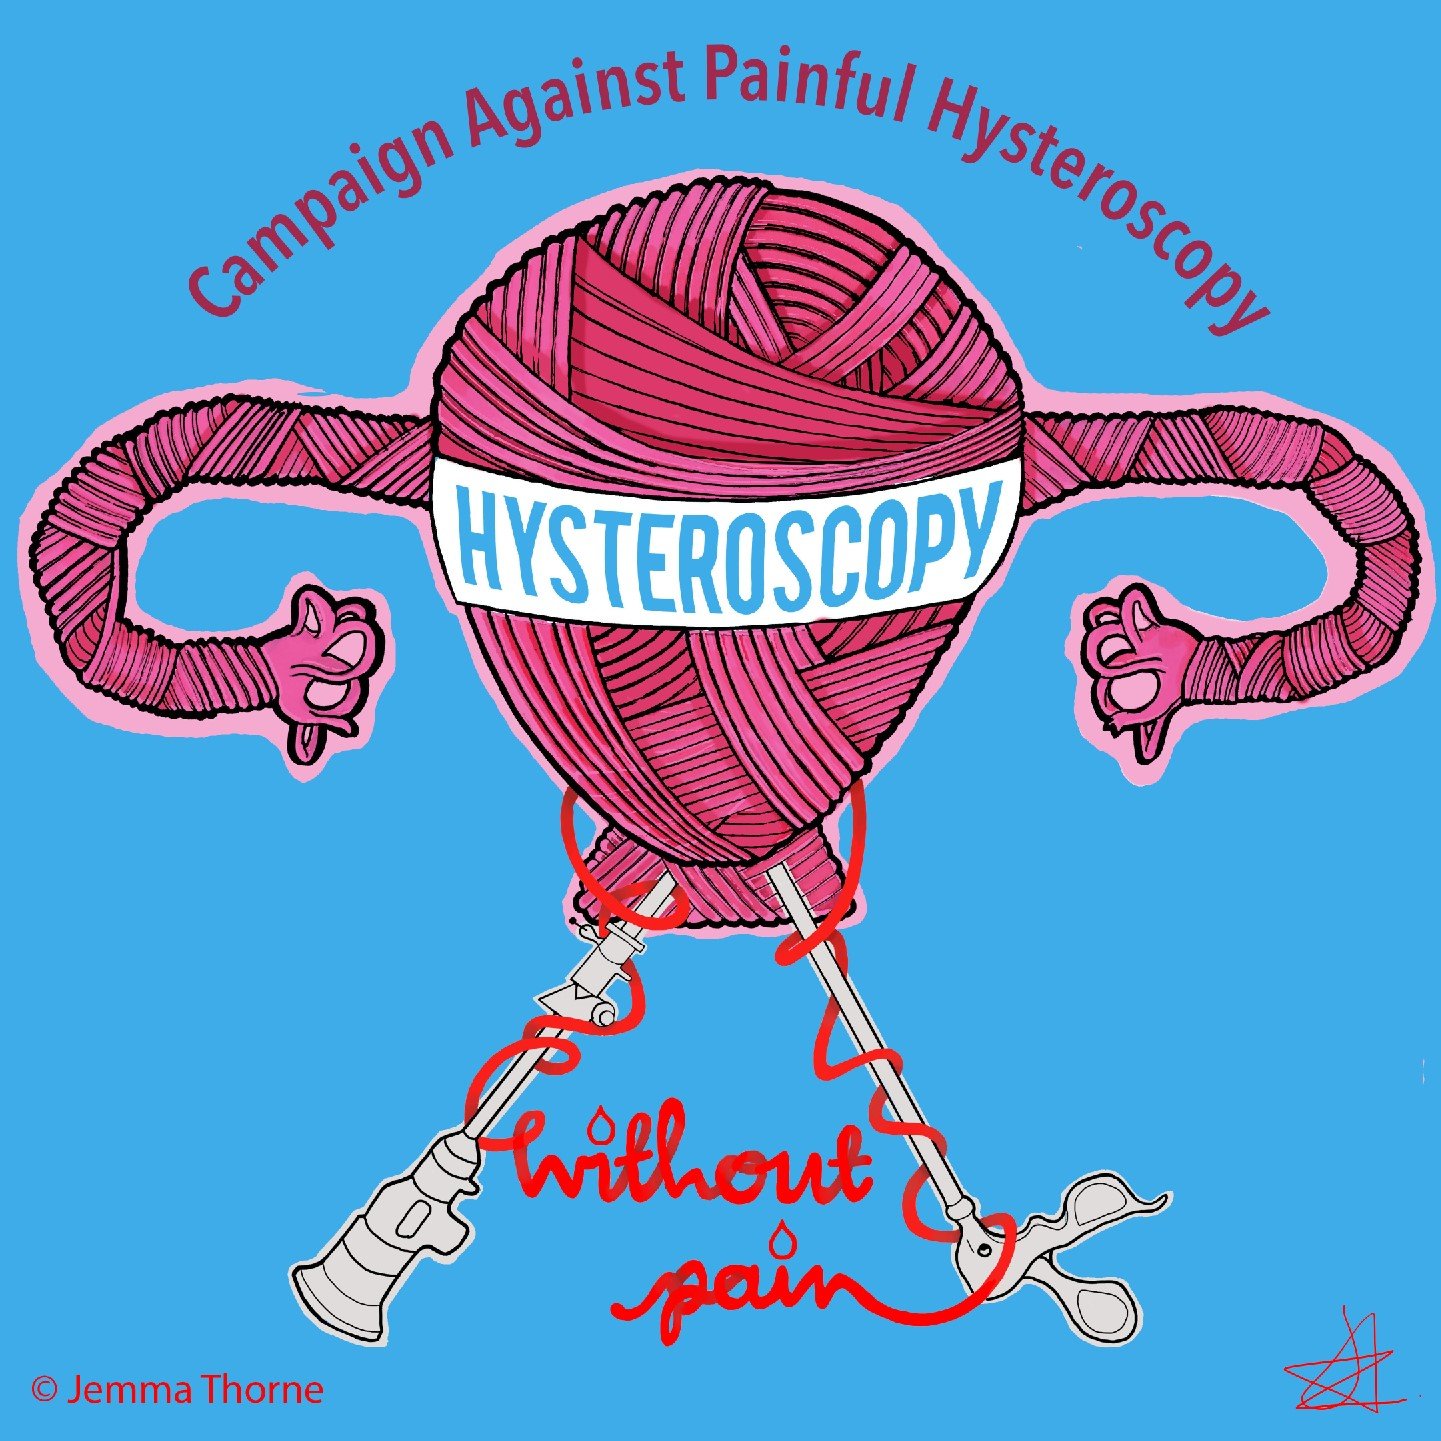 https://t.co/60w0yzOZme website of the Campaign Against Painful Hysteroscopy (Facebook) https://t.co/hhBkXBDU3m